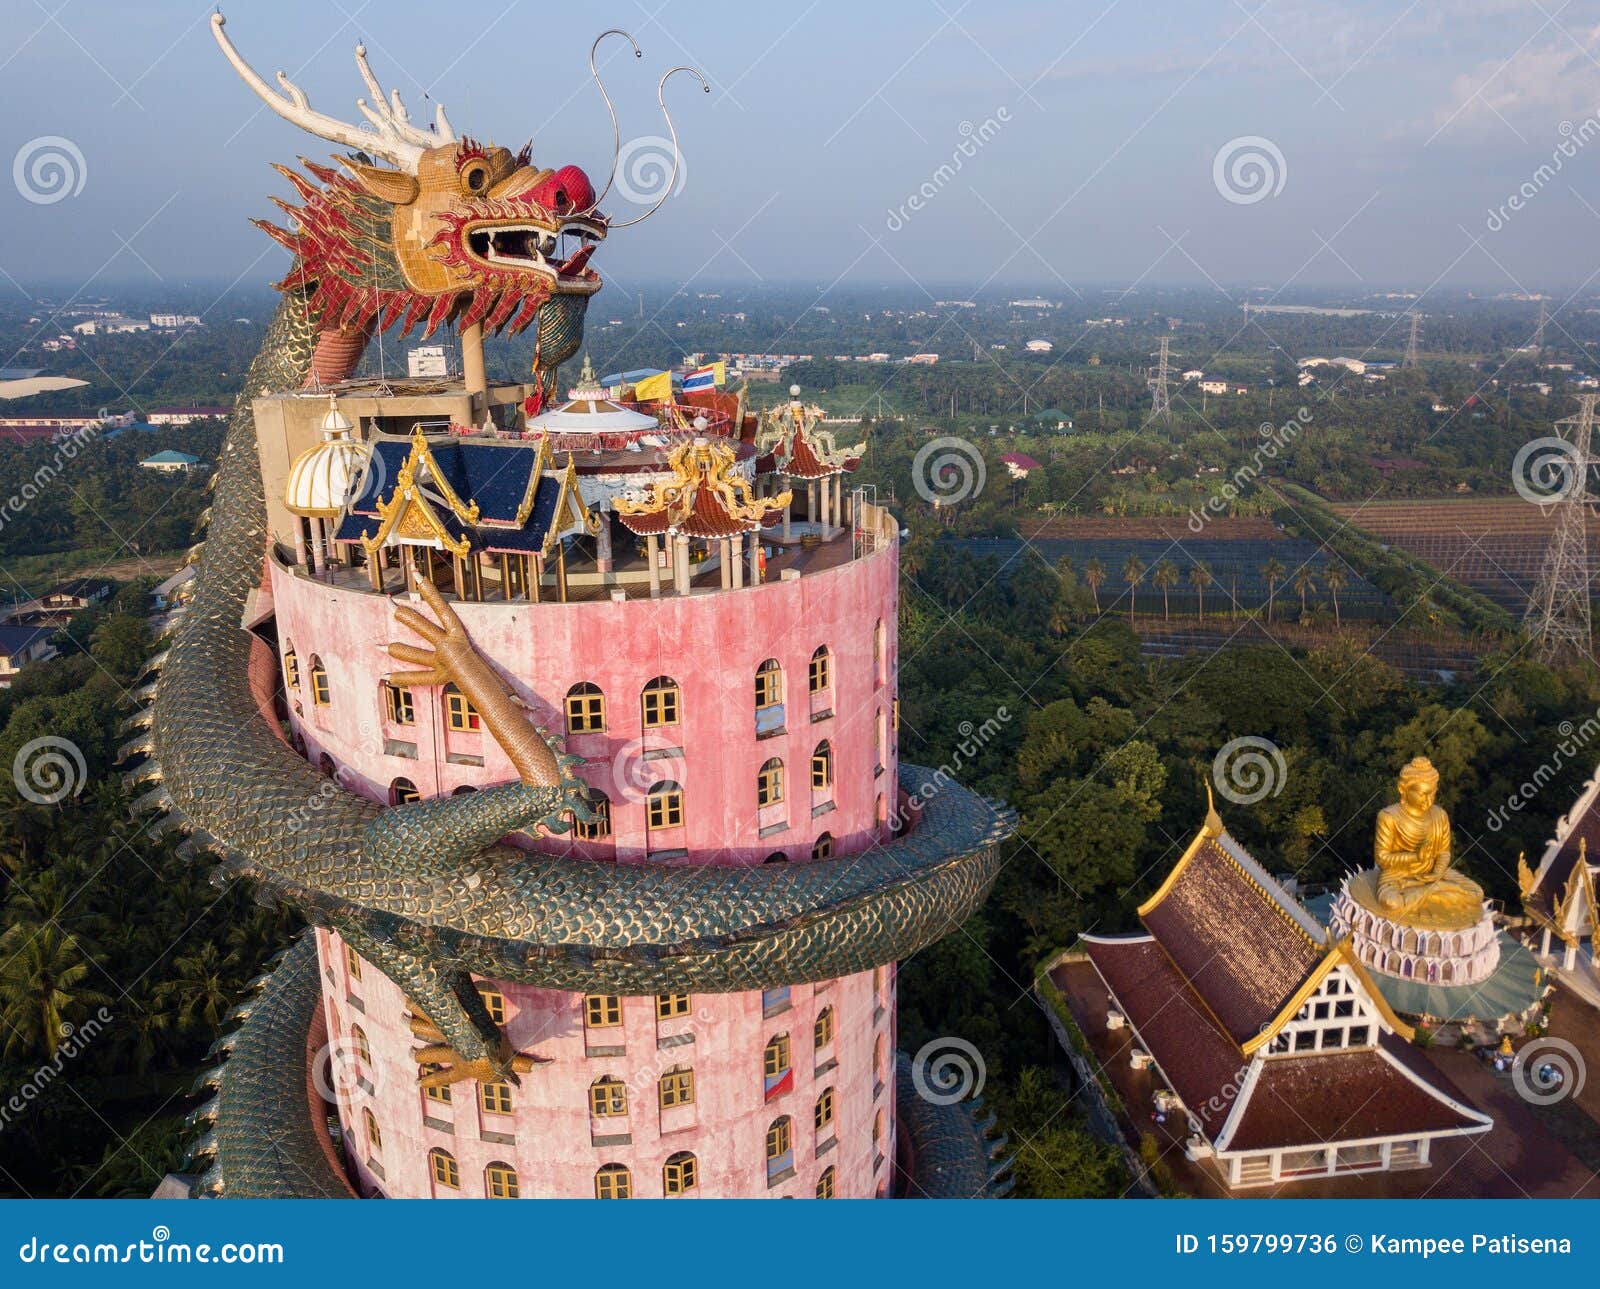 Aerial View Of Wat Samphran Dragon Temple In The Sam Phran District In Nakhon Pathom Province Near Bangkok Thailand Stock Photo Image Of District Outside